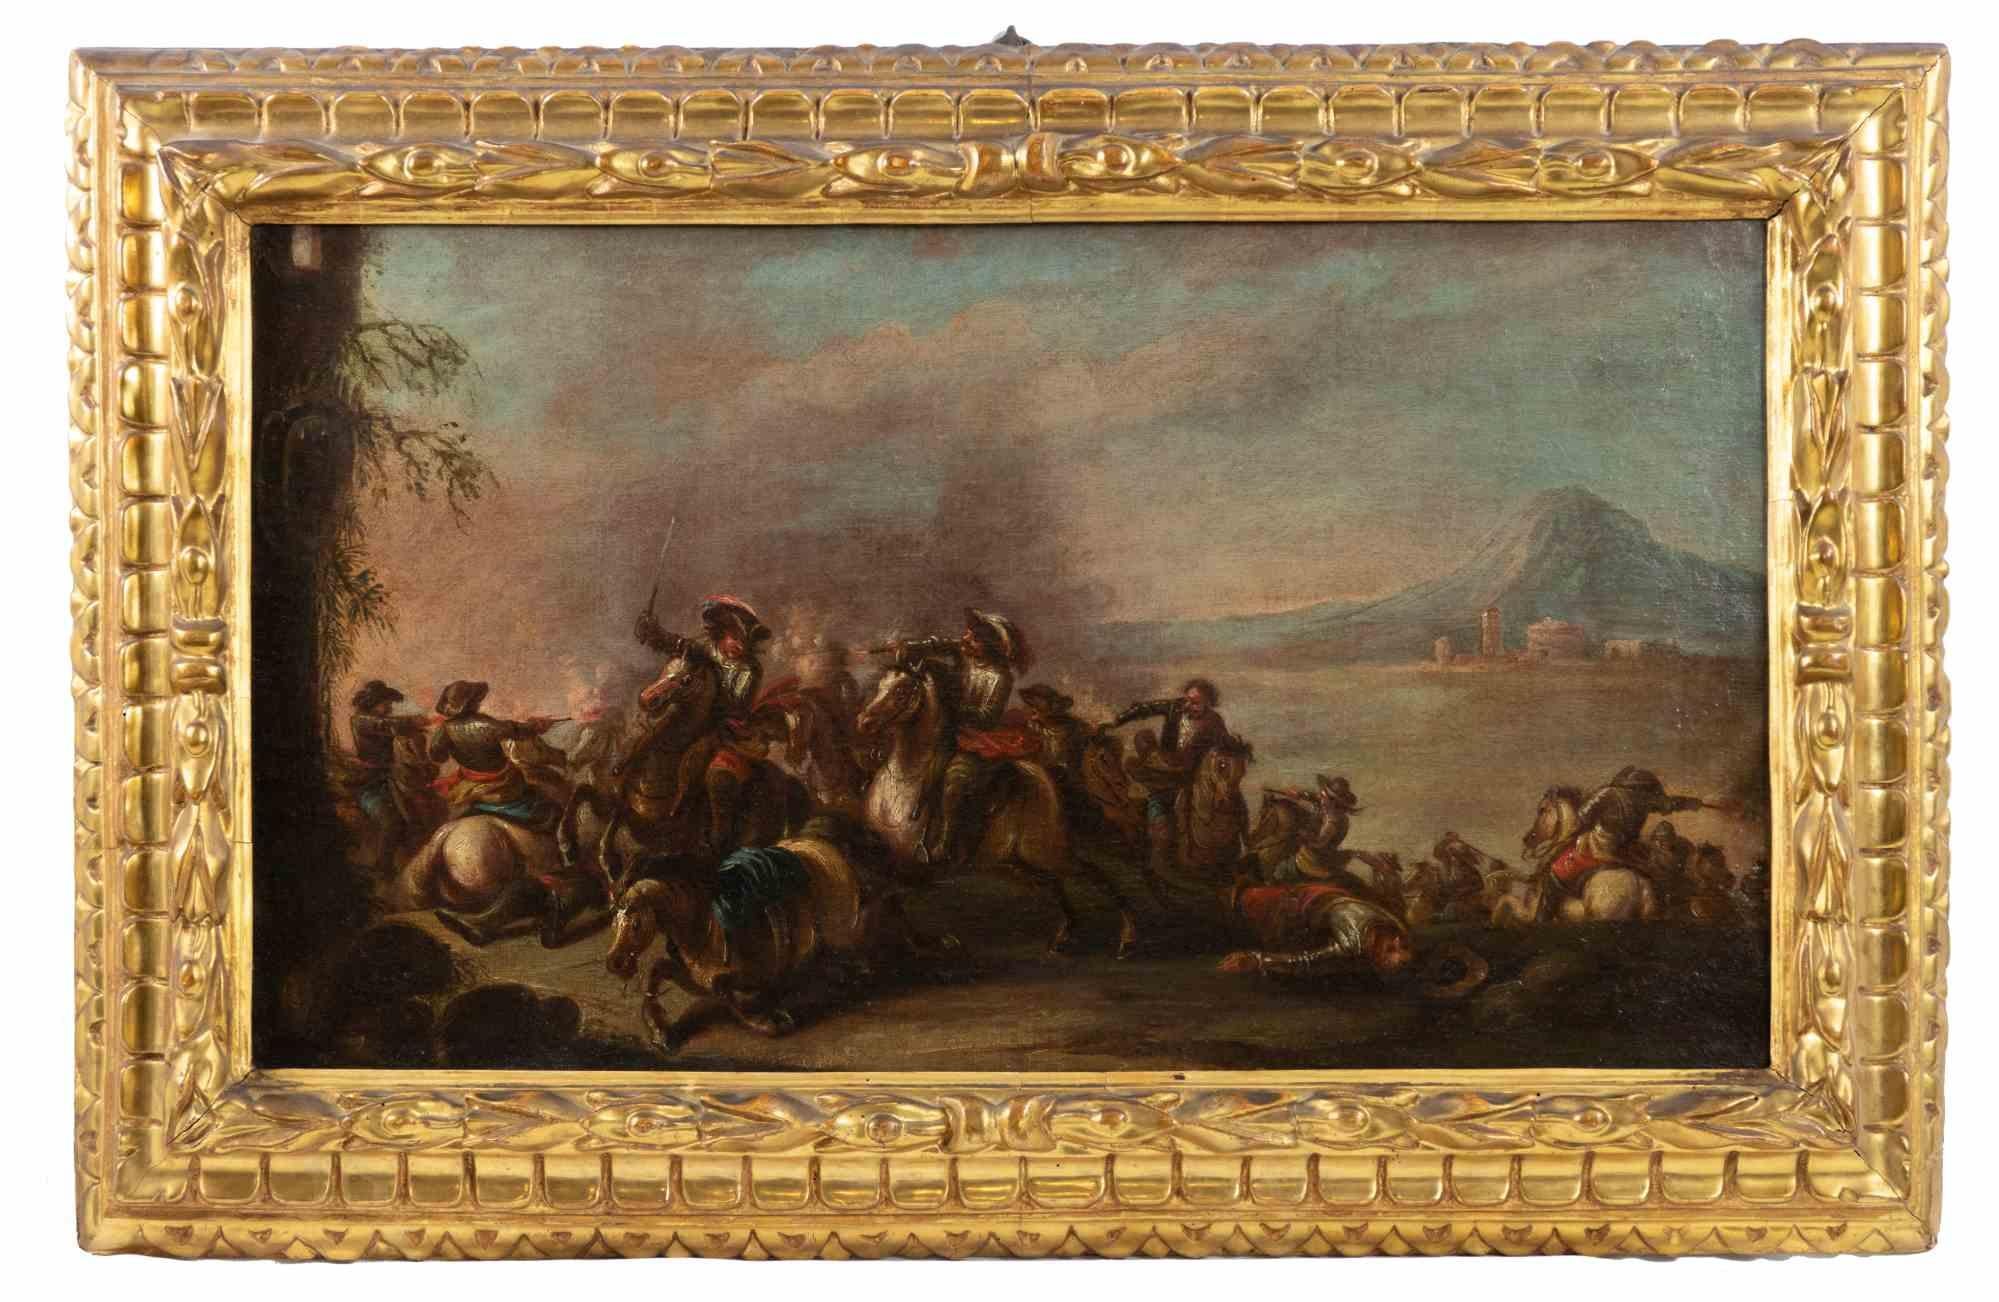 Unknown Figurative Painting - Battle Scene - Painting - 18th Century 